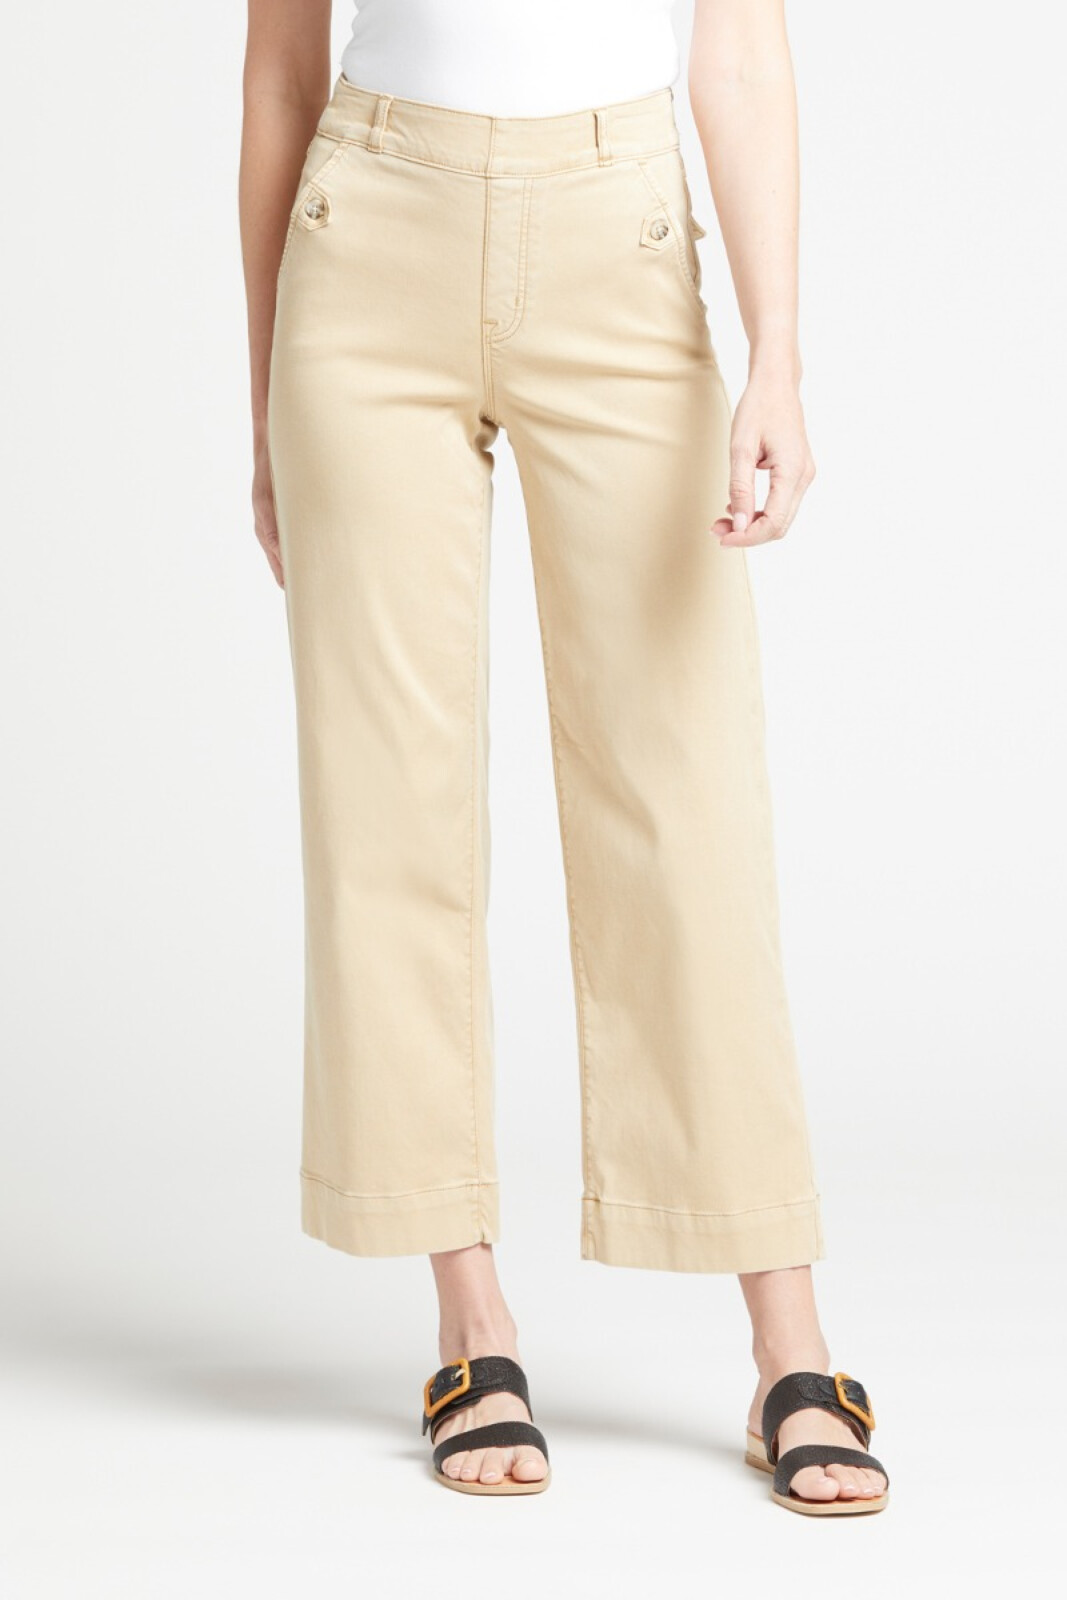 Stretch Twill Cropped Wide-Leg Pants